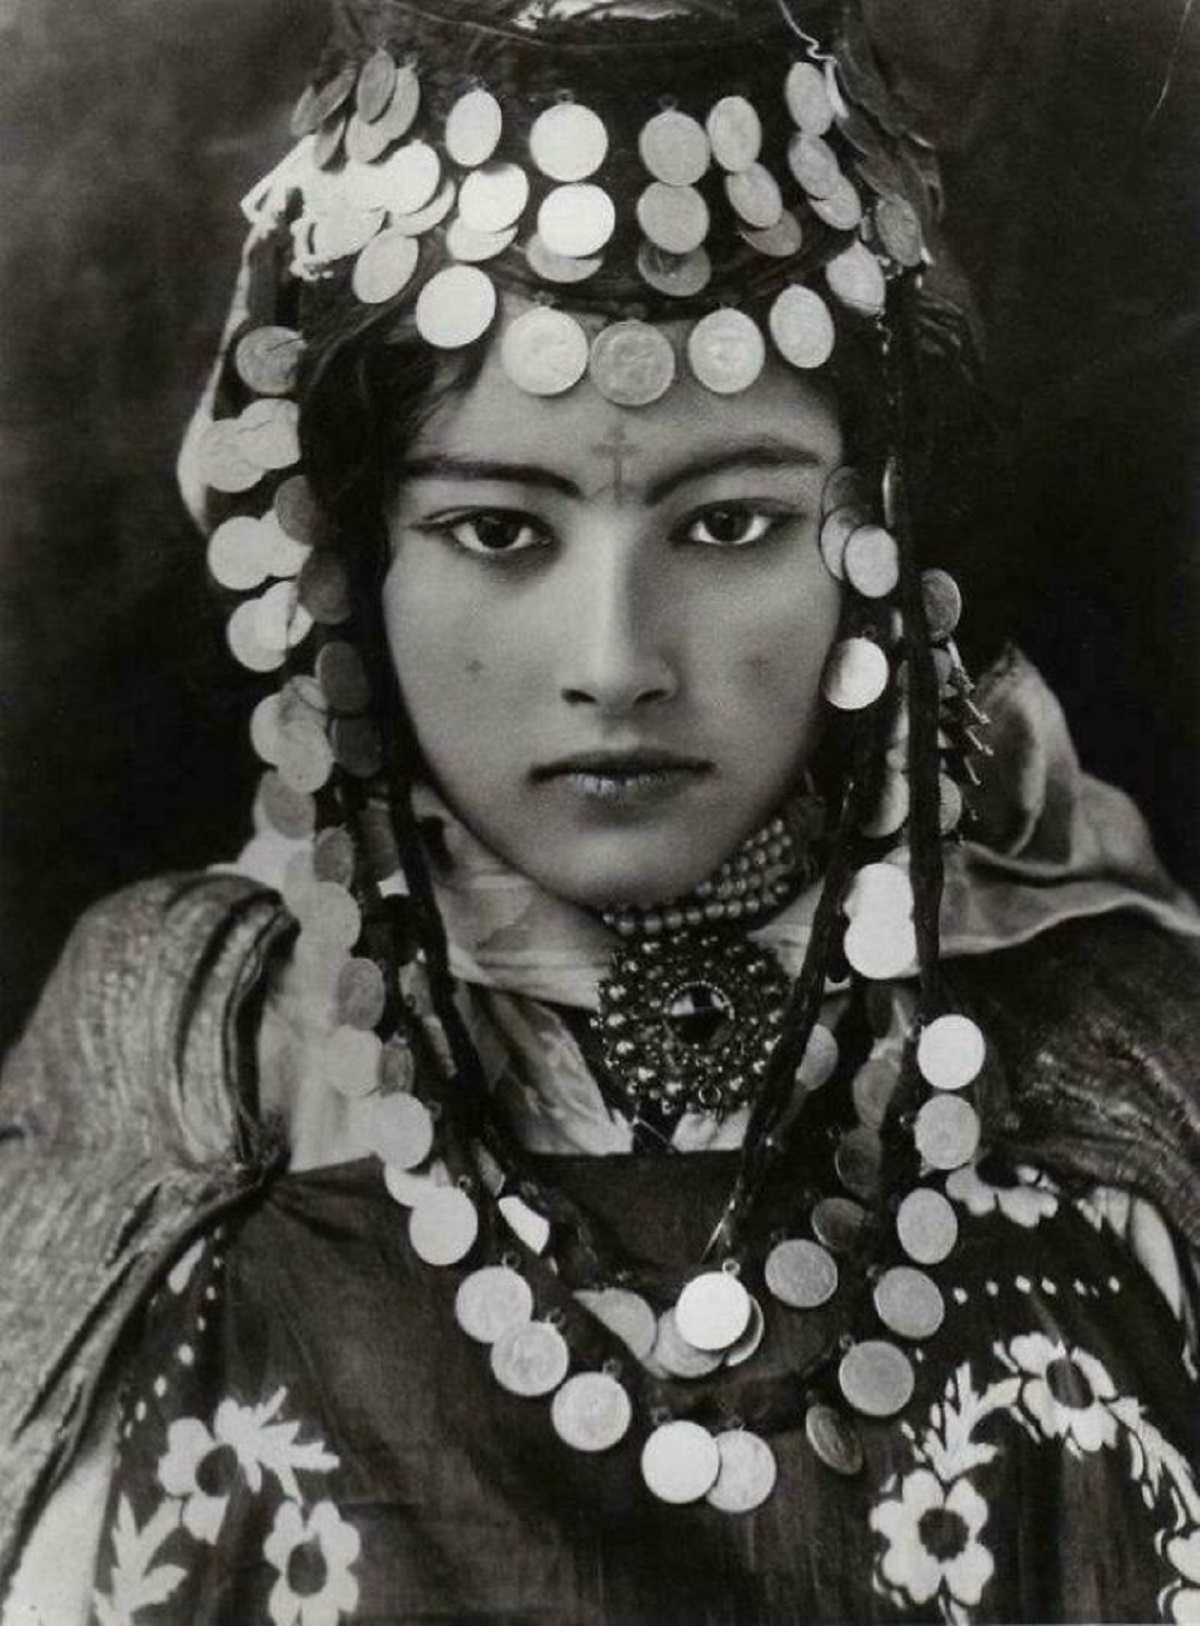 A Lady From The Ouled Naïl Tribe In Algeria, Photographed By Rudolph Lehnert In 1904